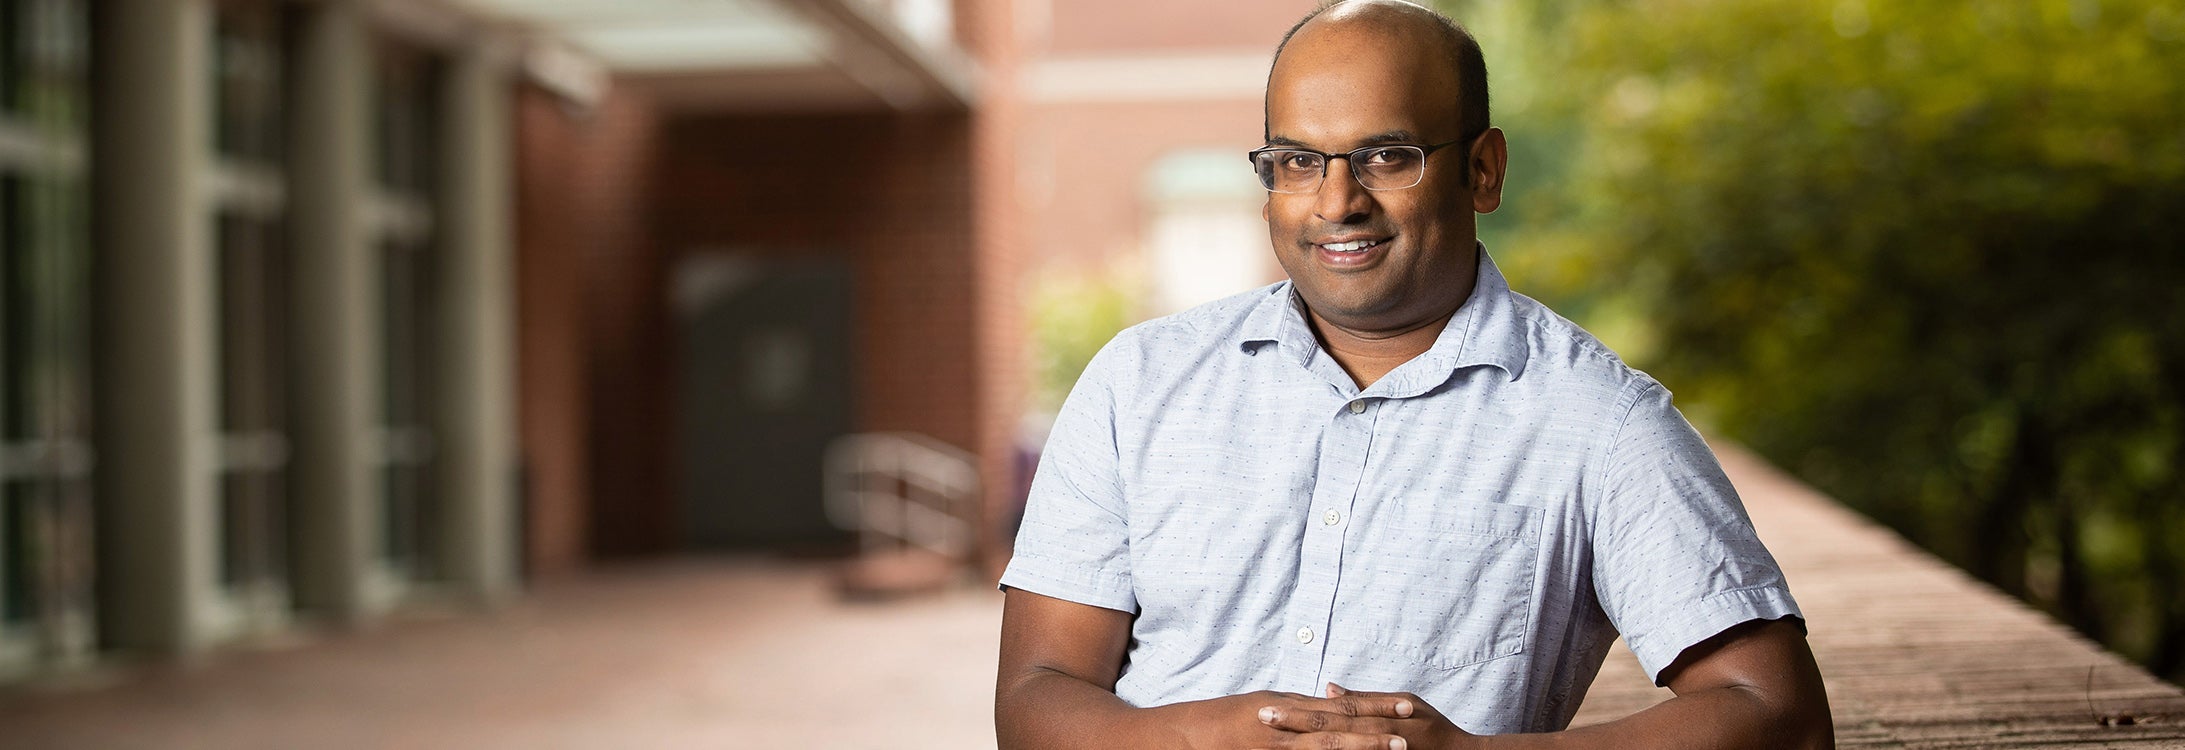 East Carolina University biology professor Chris Balakrishnan has been appointed as a temporary program director with the National Science Foundation’s Evolutionary Processes Cluster. The position allows Balakrishnan to make recommendations about which NSF research proposals to fund.